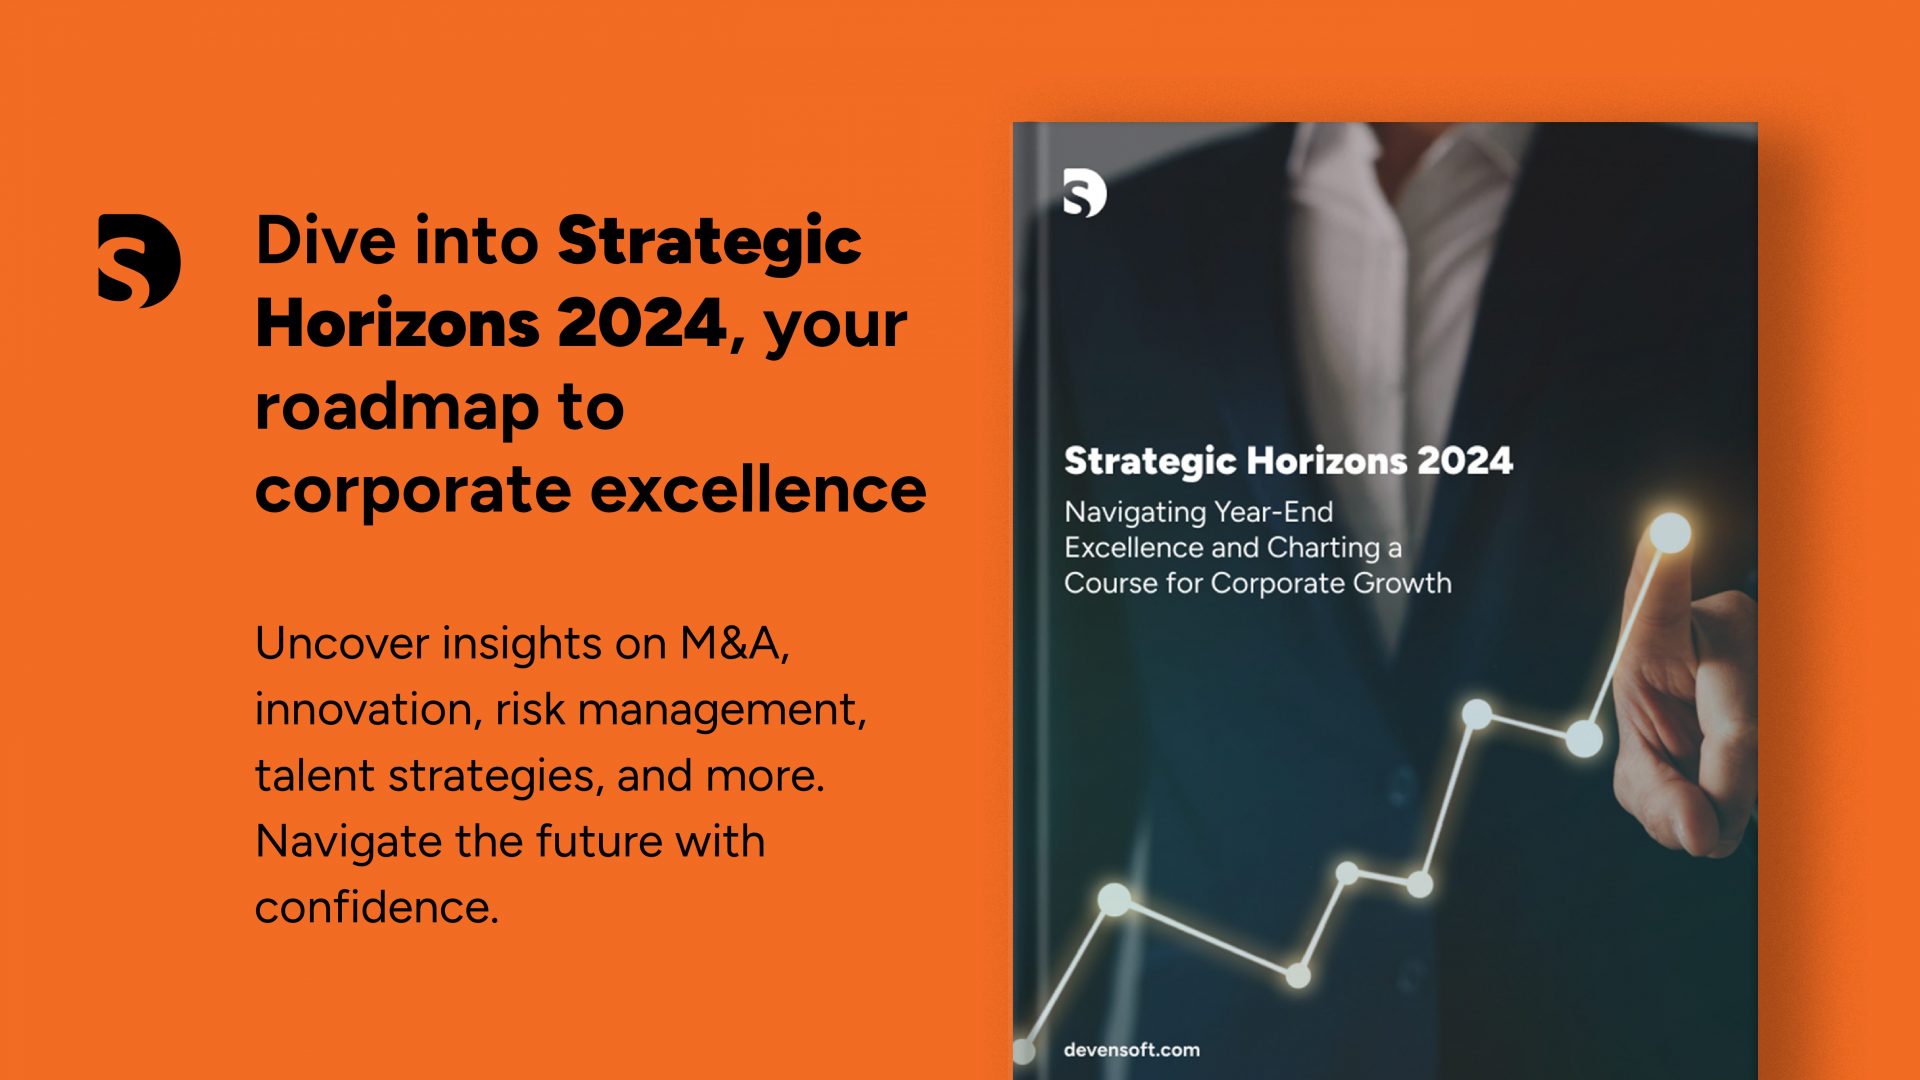 Strategic Horizons 2024: Navigating Year-End Excellence and Charting a Course for Corporate Growth